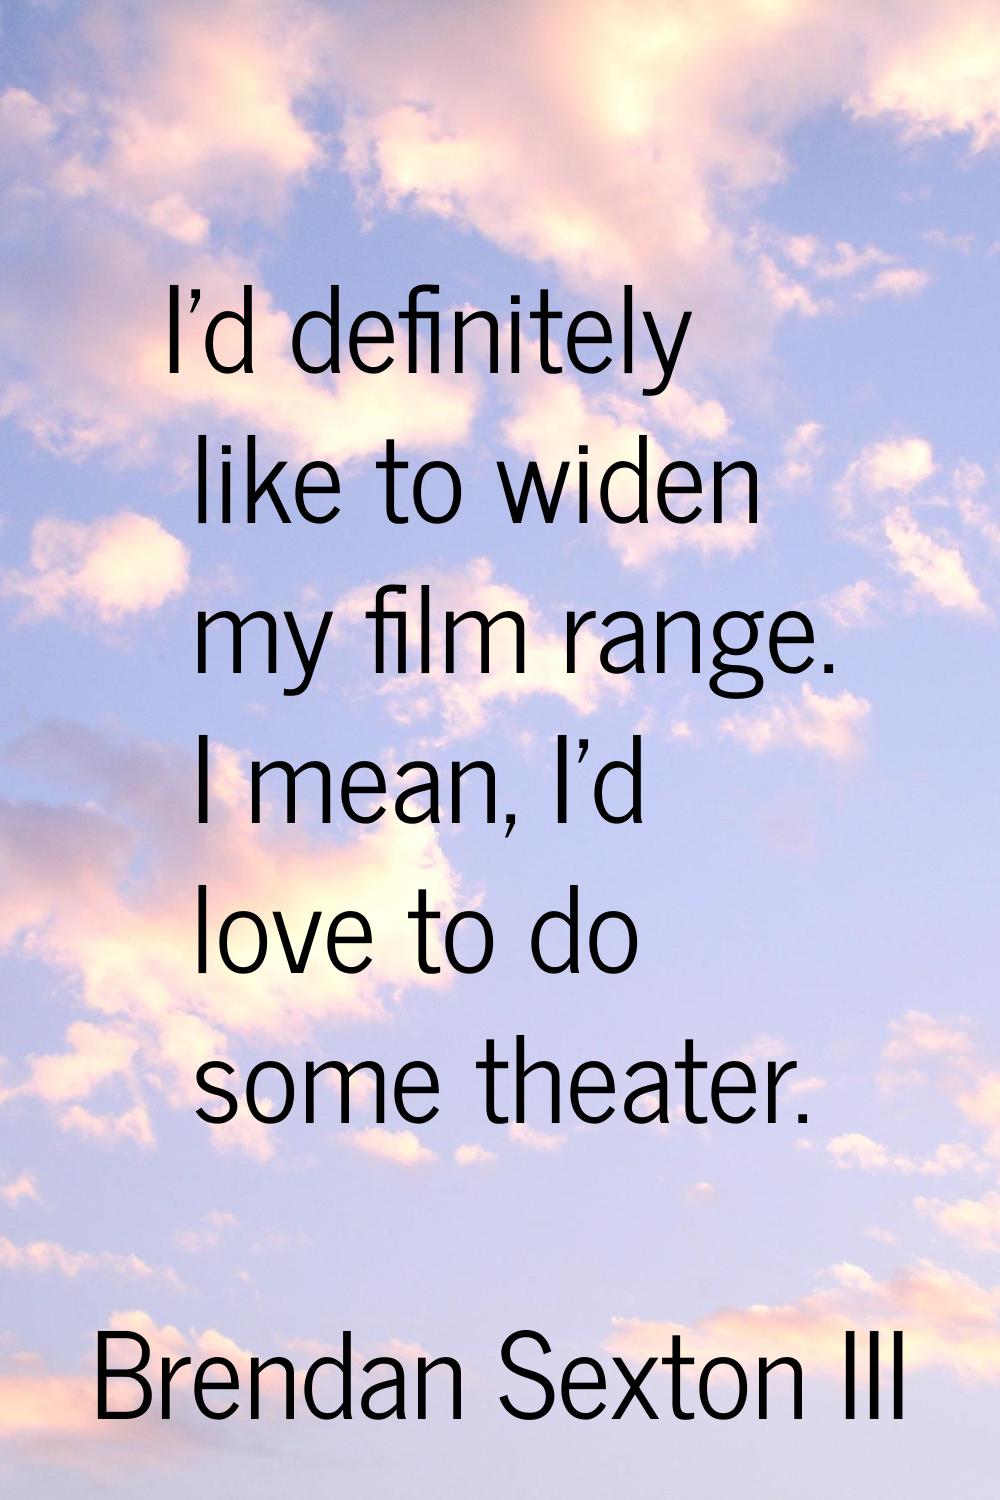 I'd definitely like to widen my film range. I mean, I'd love to do some theater.